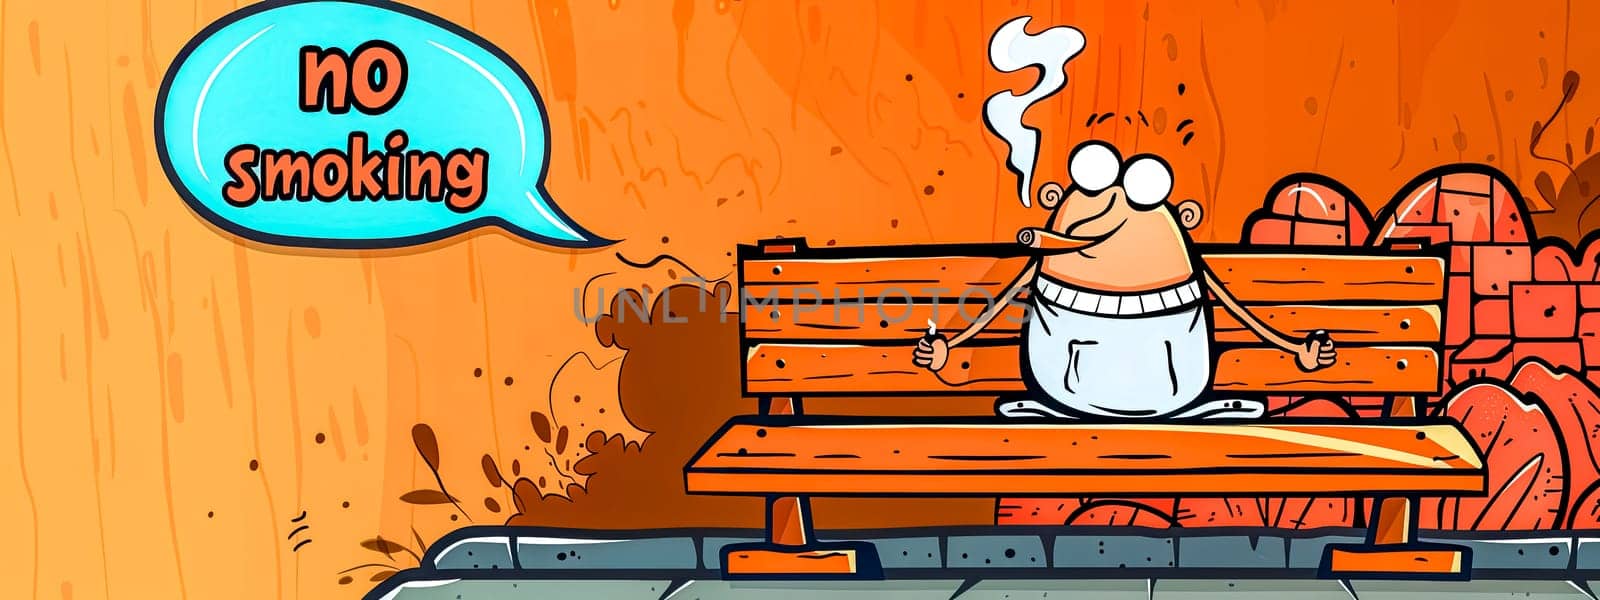 Cartoon chef with no smoking sign on park bench by Edophoto